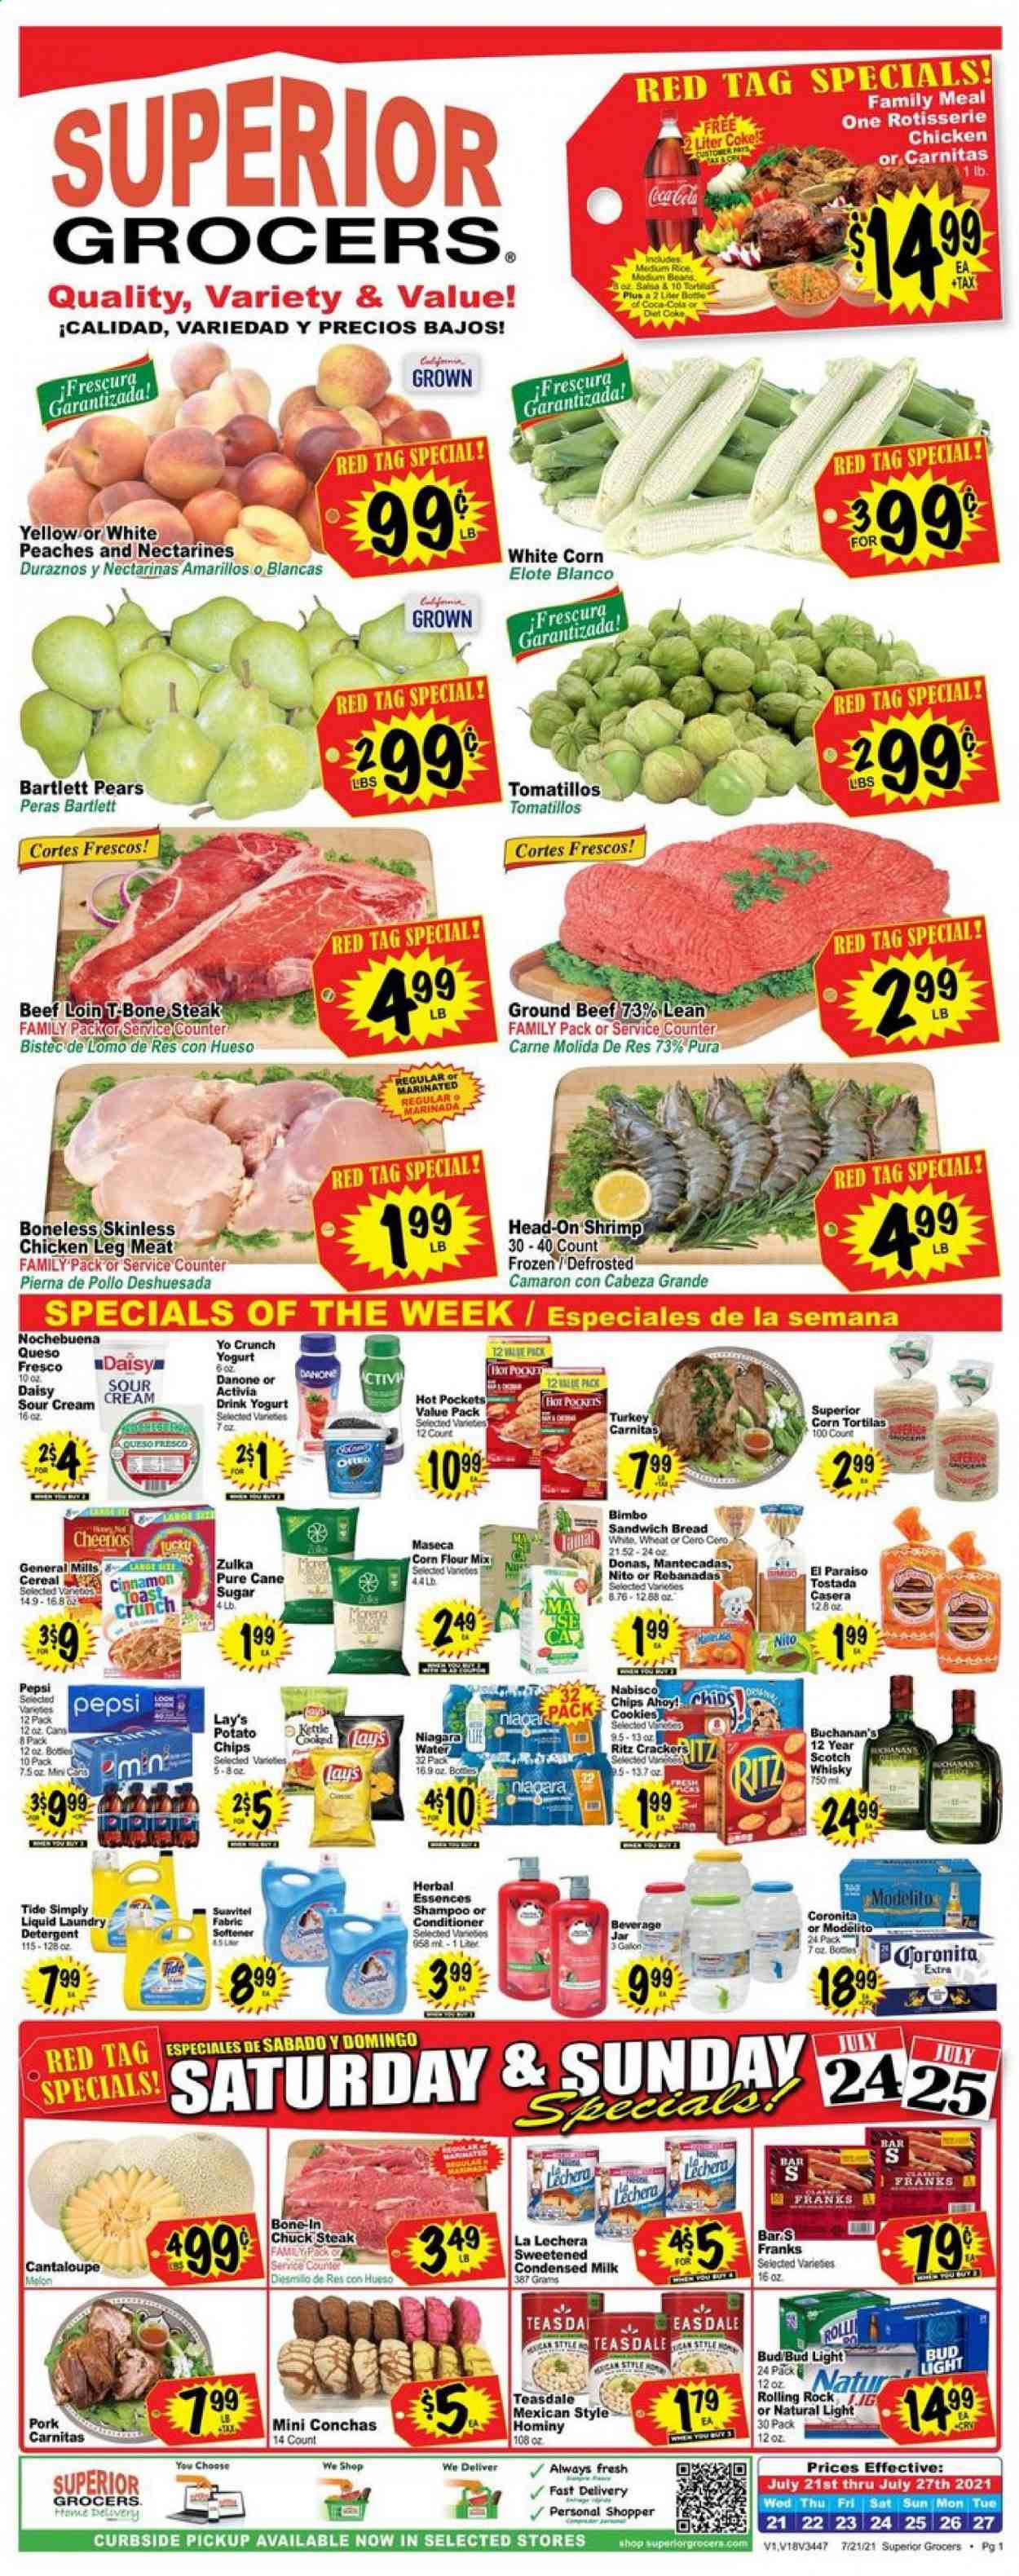 thumbnail - Superior Grocers Flyer - 07/21/2021 - 07/27/2021 - Sales products - Bartlett pears, bread, tortillas, cantaloupe, tomatillo, pears, chicken legs, beef meat, ground beef, steak, chuck steak, shrimps, hot pocket, chicken roast, queso fresco, yoghurt, Danone, Activia, milk, condensed milk, sour cream, cookies, Chips Ahoy!, RITZ, potato chips, Lay’s, cane sugar, flour, sugar, corn flour, cereals, Cheerios, rice, cinnamon, Coca-Cola, Pepsi, scotch whisky, whisky, beer, Bud Light, Tide, fabric softener, laundry detergent, conditioner, Herbal Essences, jar, nectarines, melons, peaches. Page 1.